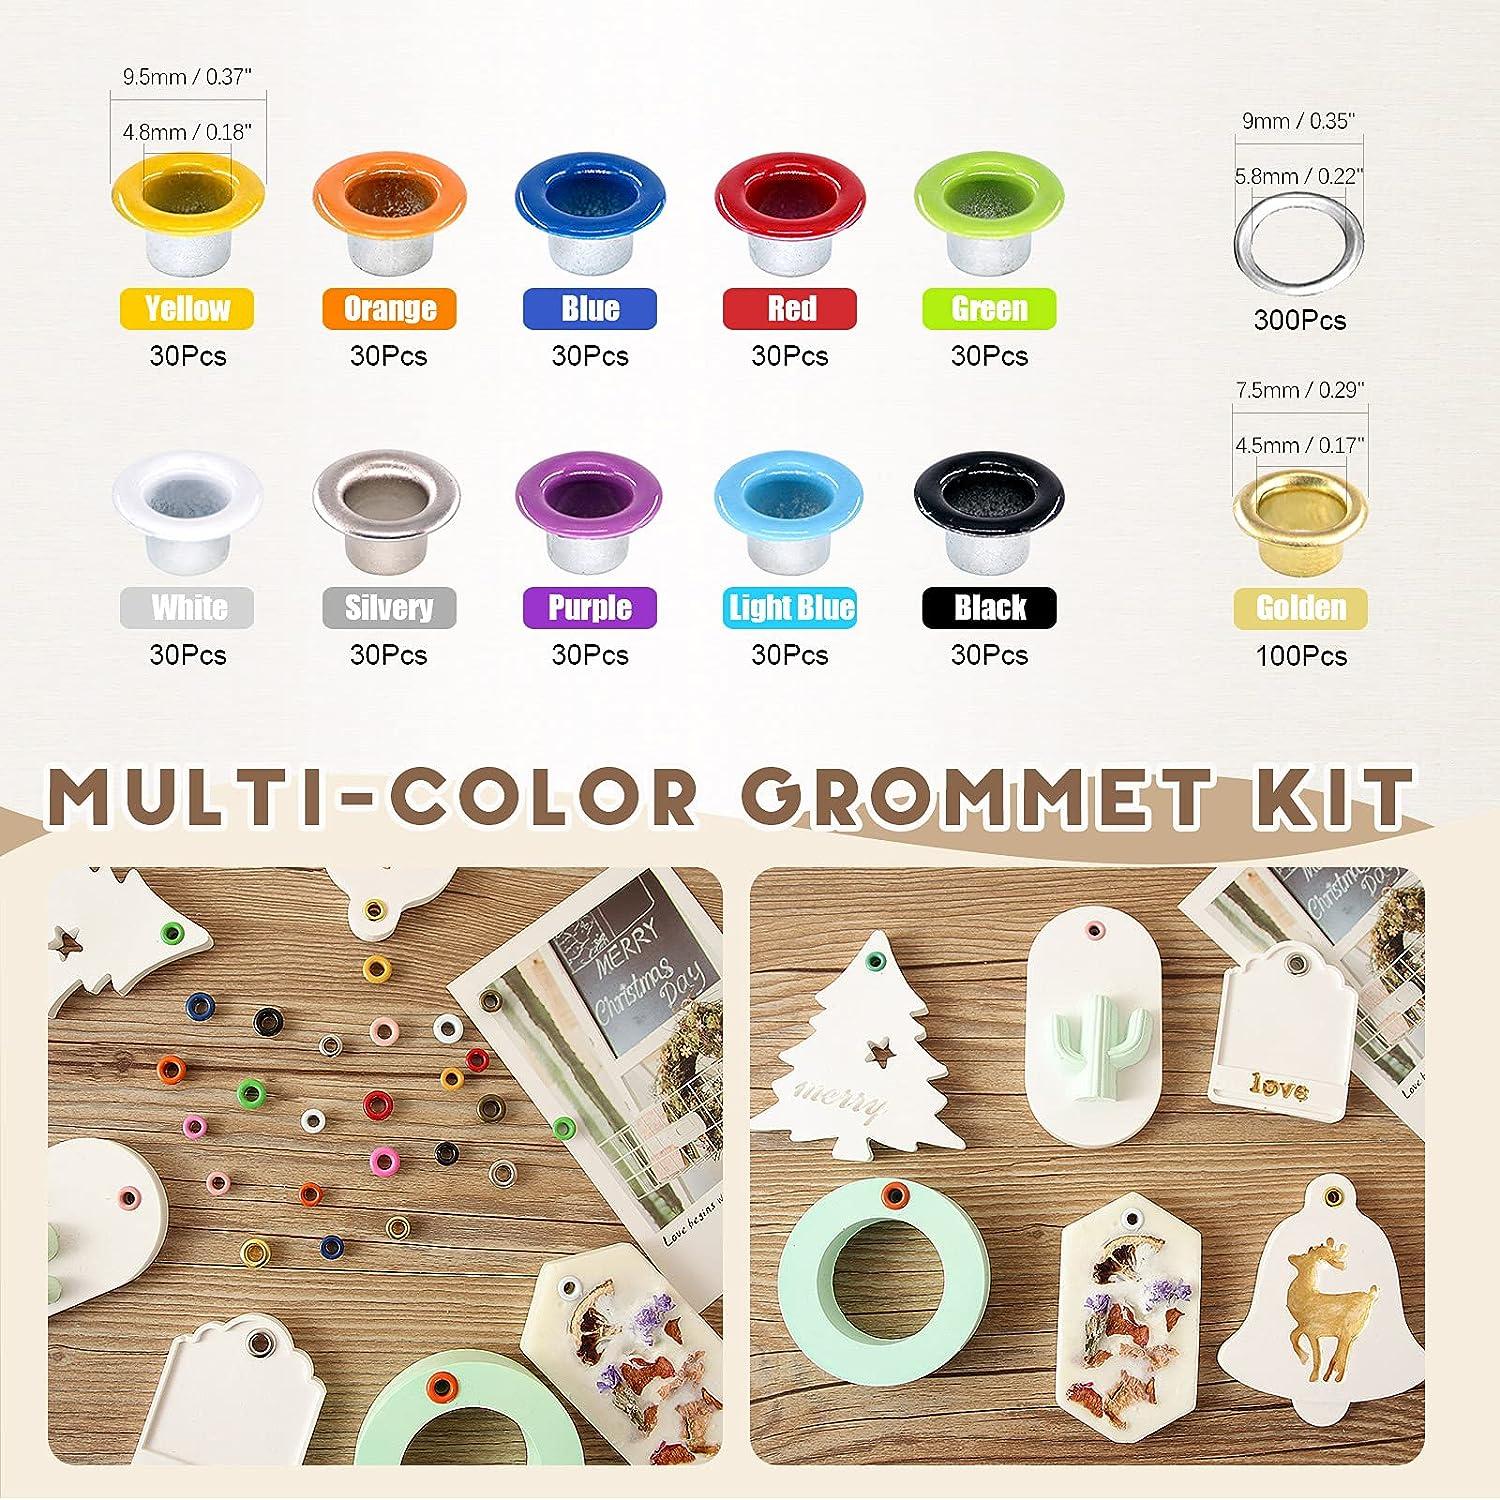 QLOUNI 360 Sets 3/16 inch 12 Colors Grommets Kit Metal Eyelets with  Installation Tools for Leather Craft Making Clothing Repair and Decoration  360Pcs 3/16 inch 12 Colors